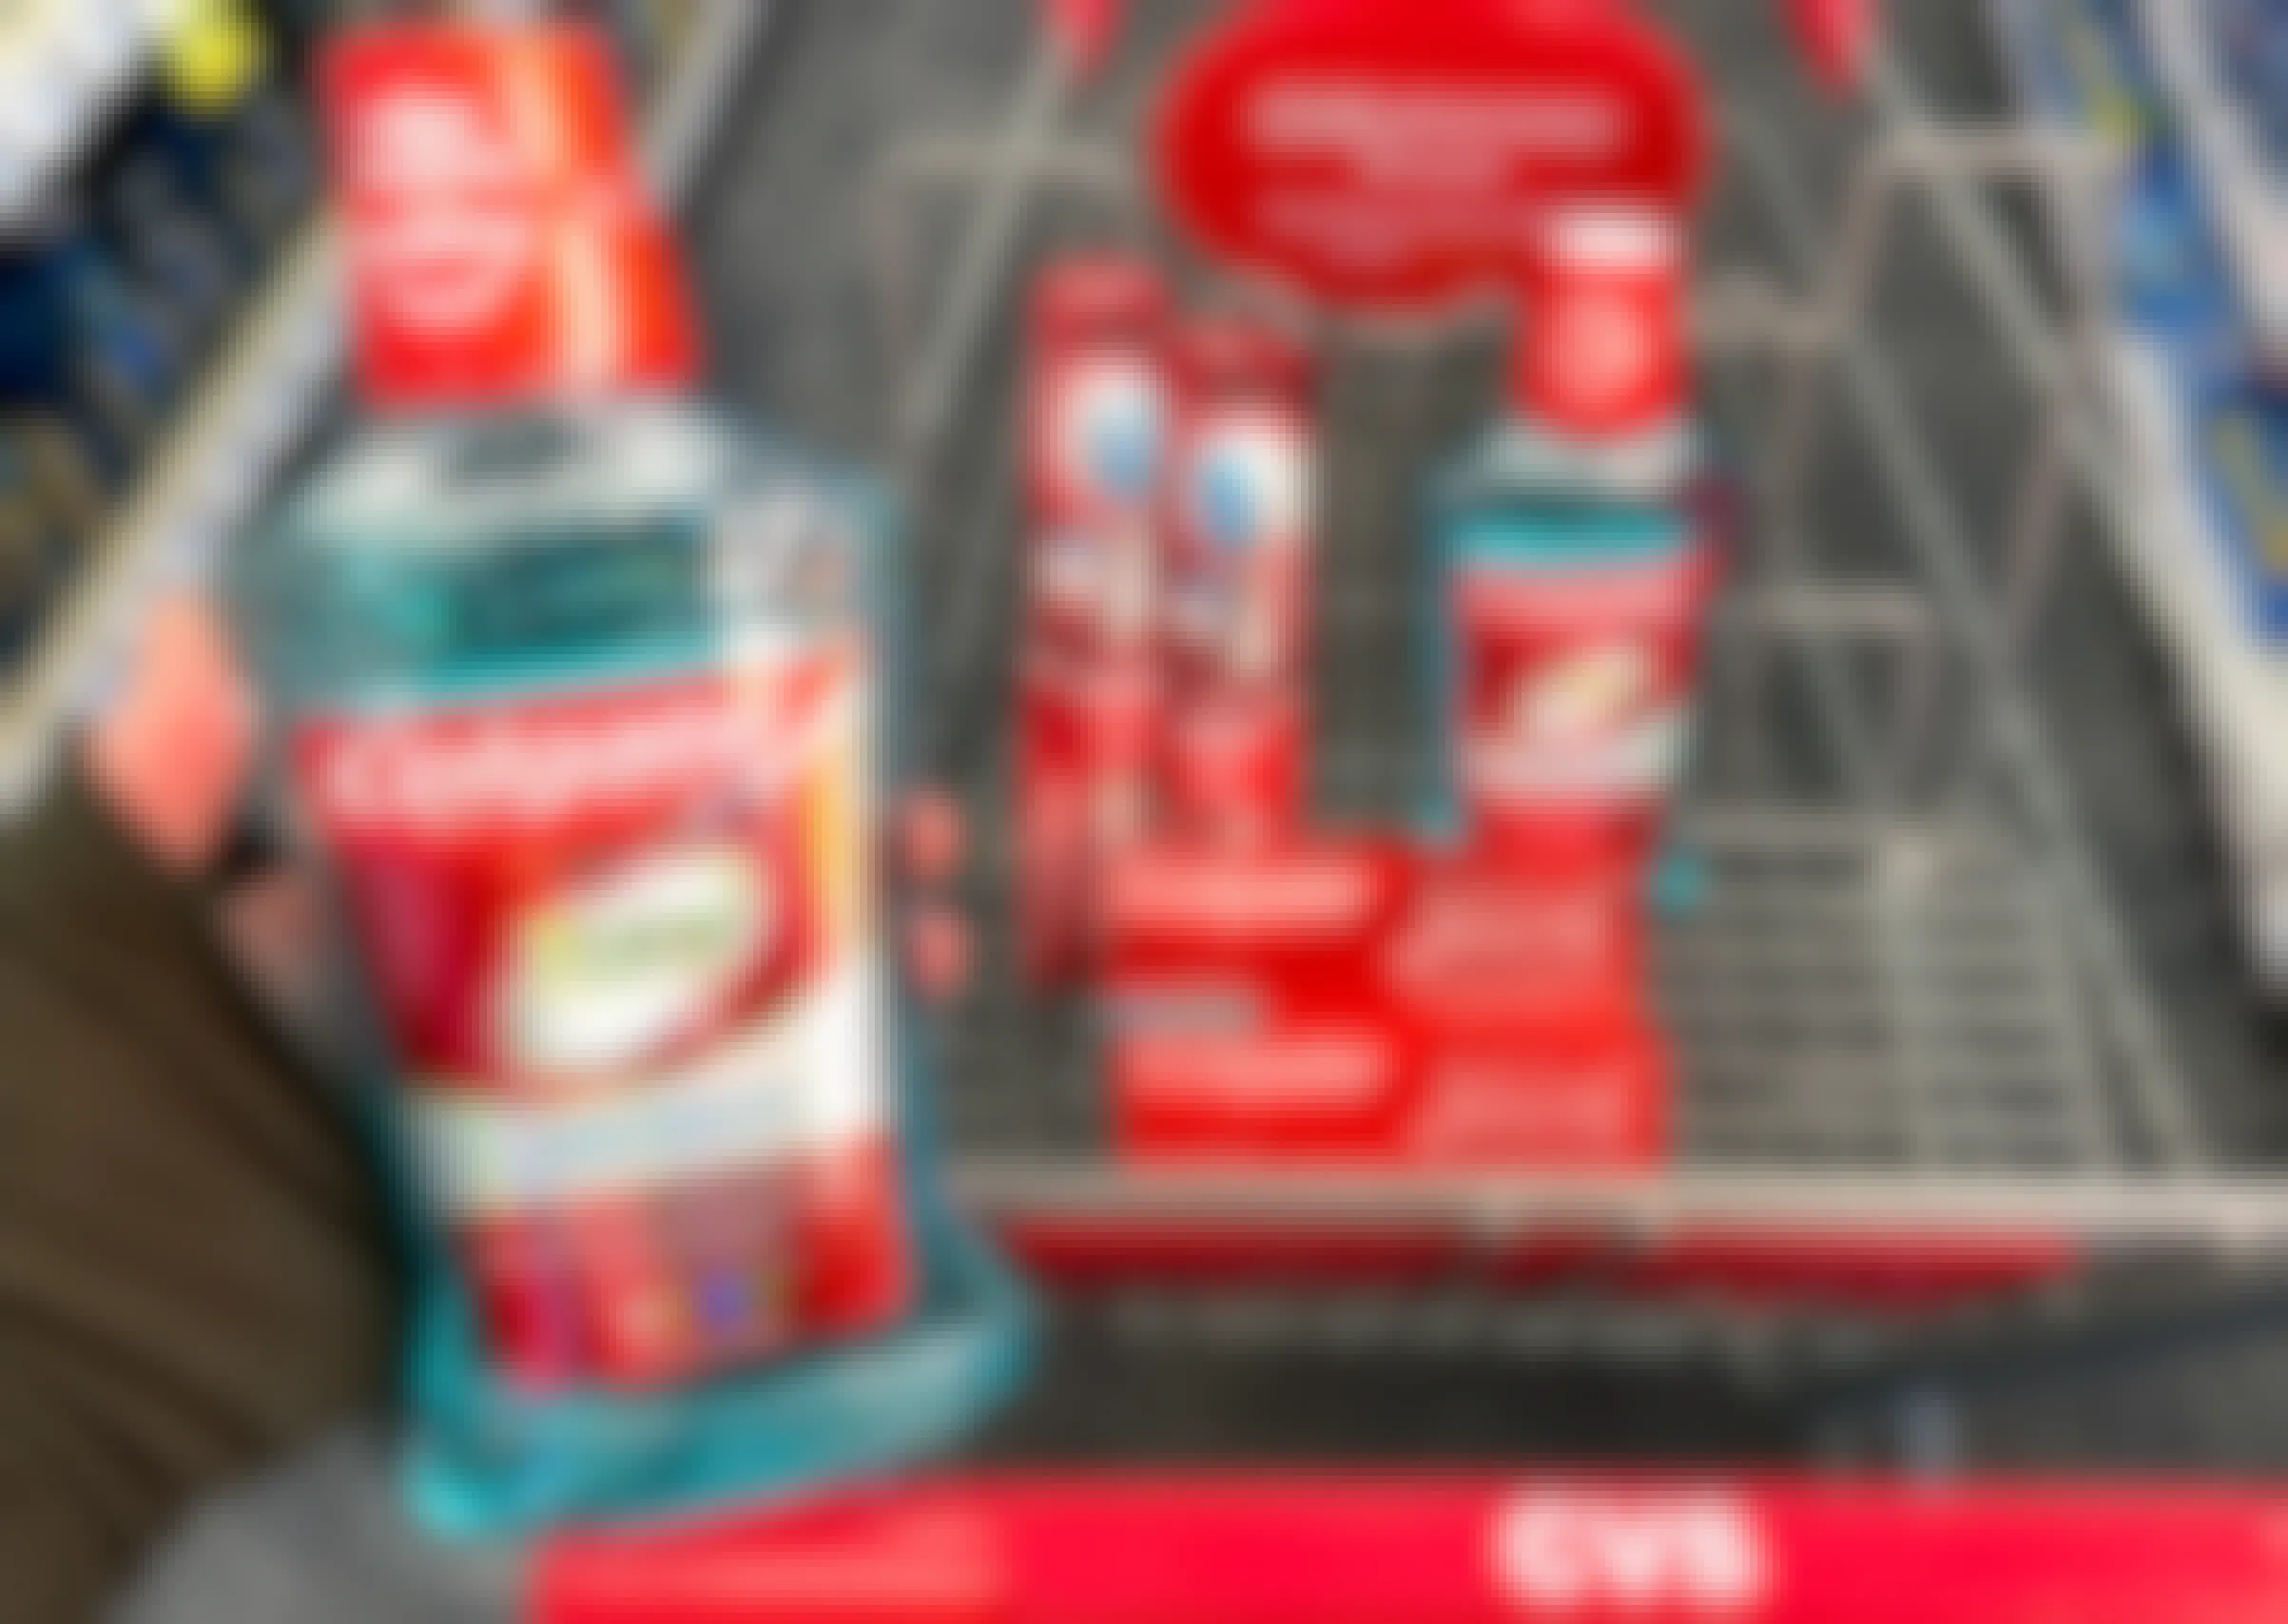 A person's hand holding a bottle of Colgate Total mouthwash above a CVS shopping cart with more Colgate mouthwash, Colgate Optic White toothpaste, and Colgate toothbrushes in the basket.